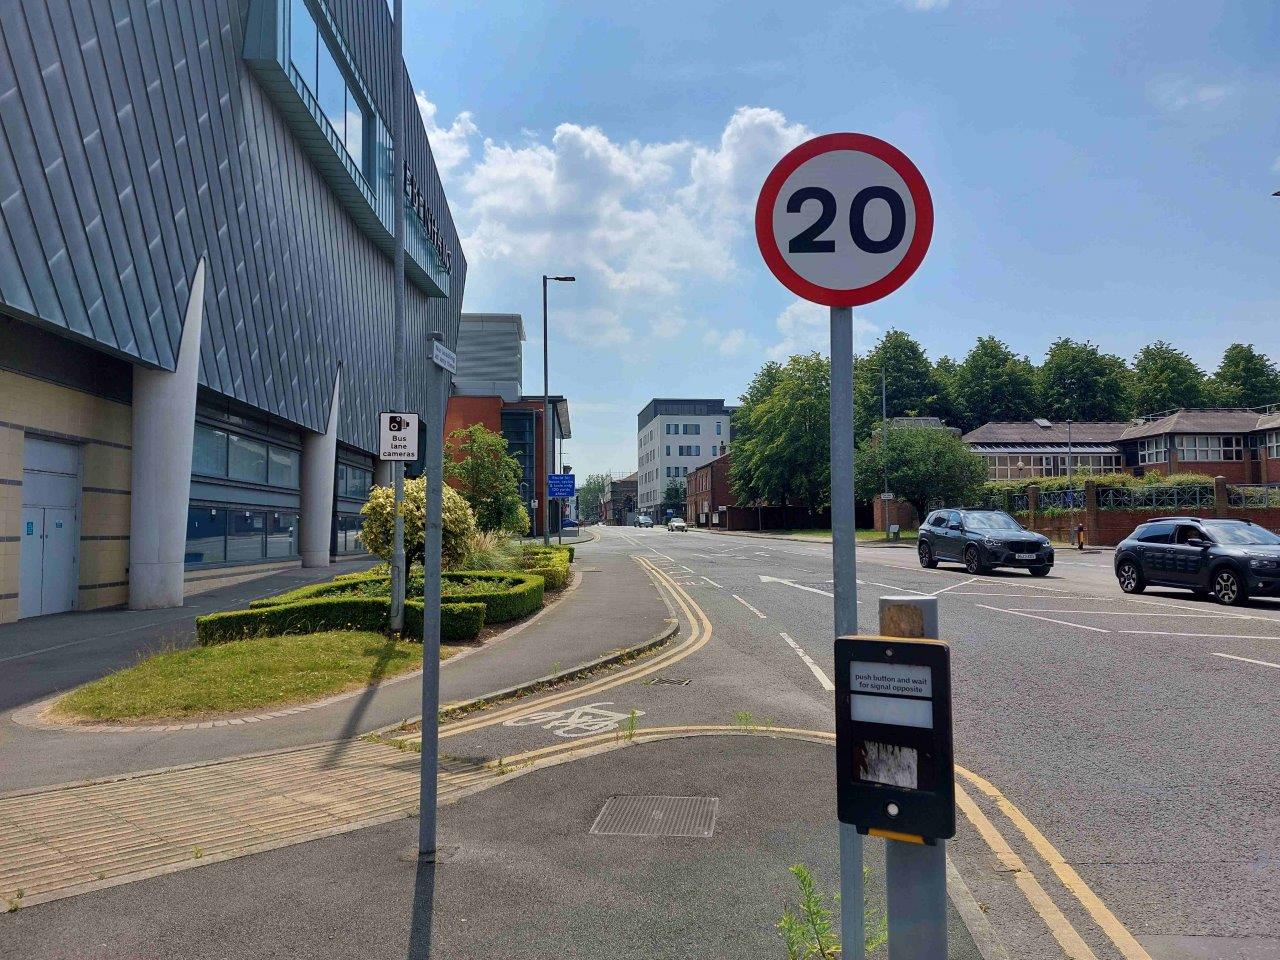 Legh Street bus lane - Bus lane signage at the entrance to Legh Street from Midland Way